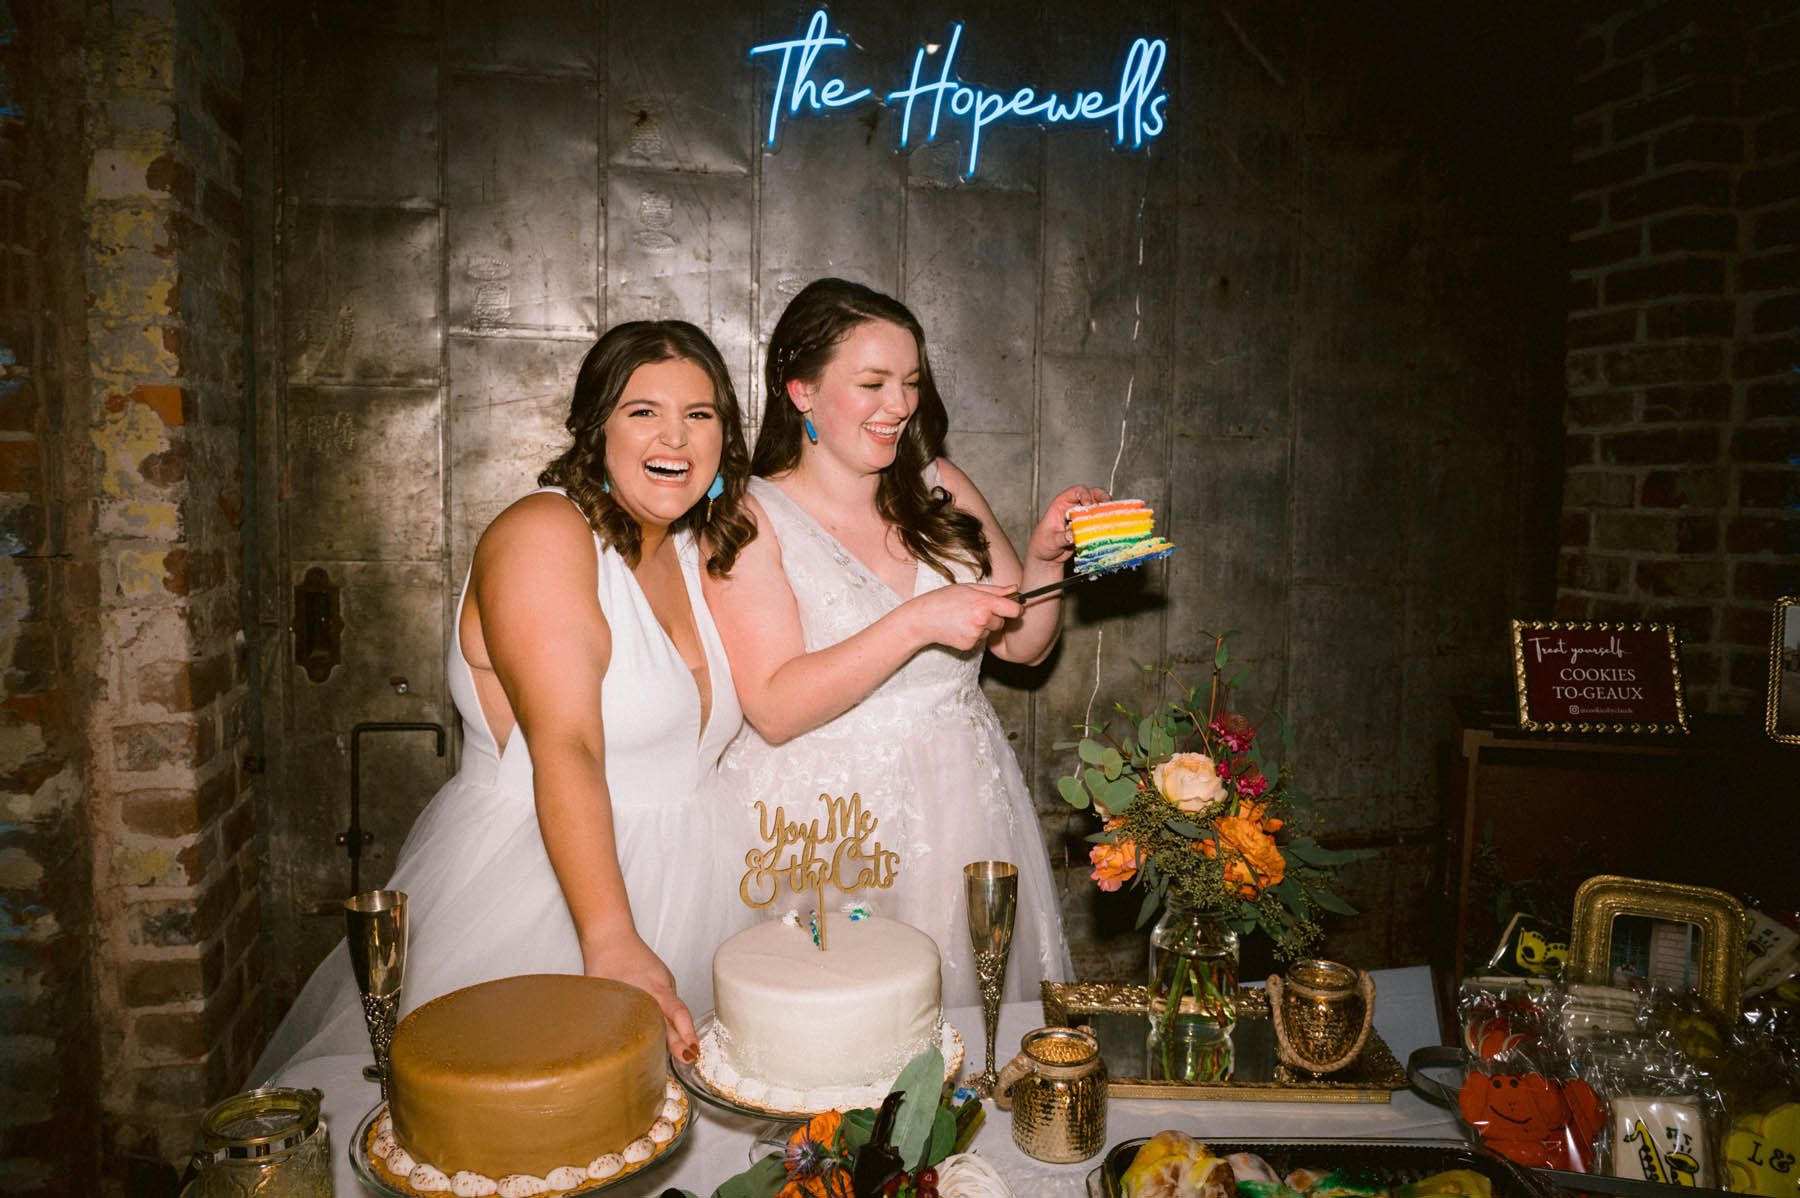 The newlyweds smile as the cut their cake. It has rainbow layers. Behind them is a small blue neon sign that reads: The Hopewells.